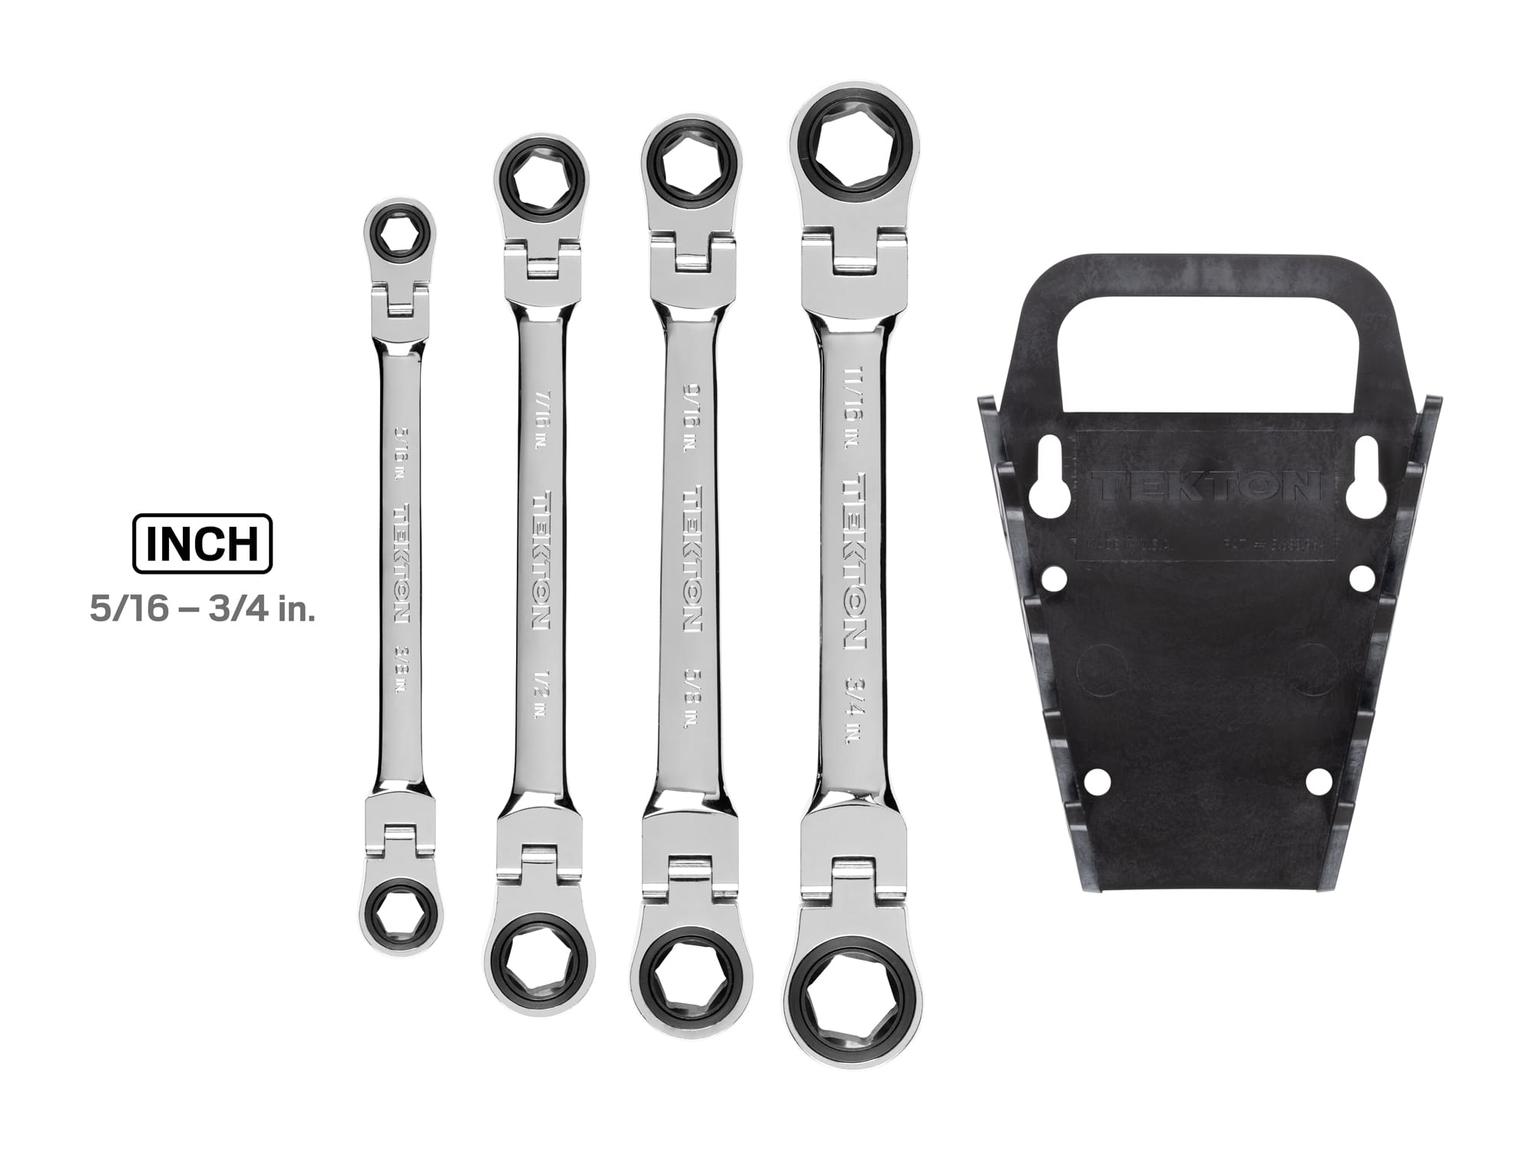 TEKTON WRN76062-T Flex Ratcheting Box End Wrench Set with Holder, 4-Piece (5/16-3/4 in.)